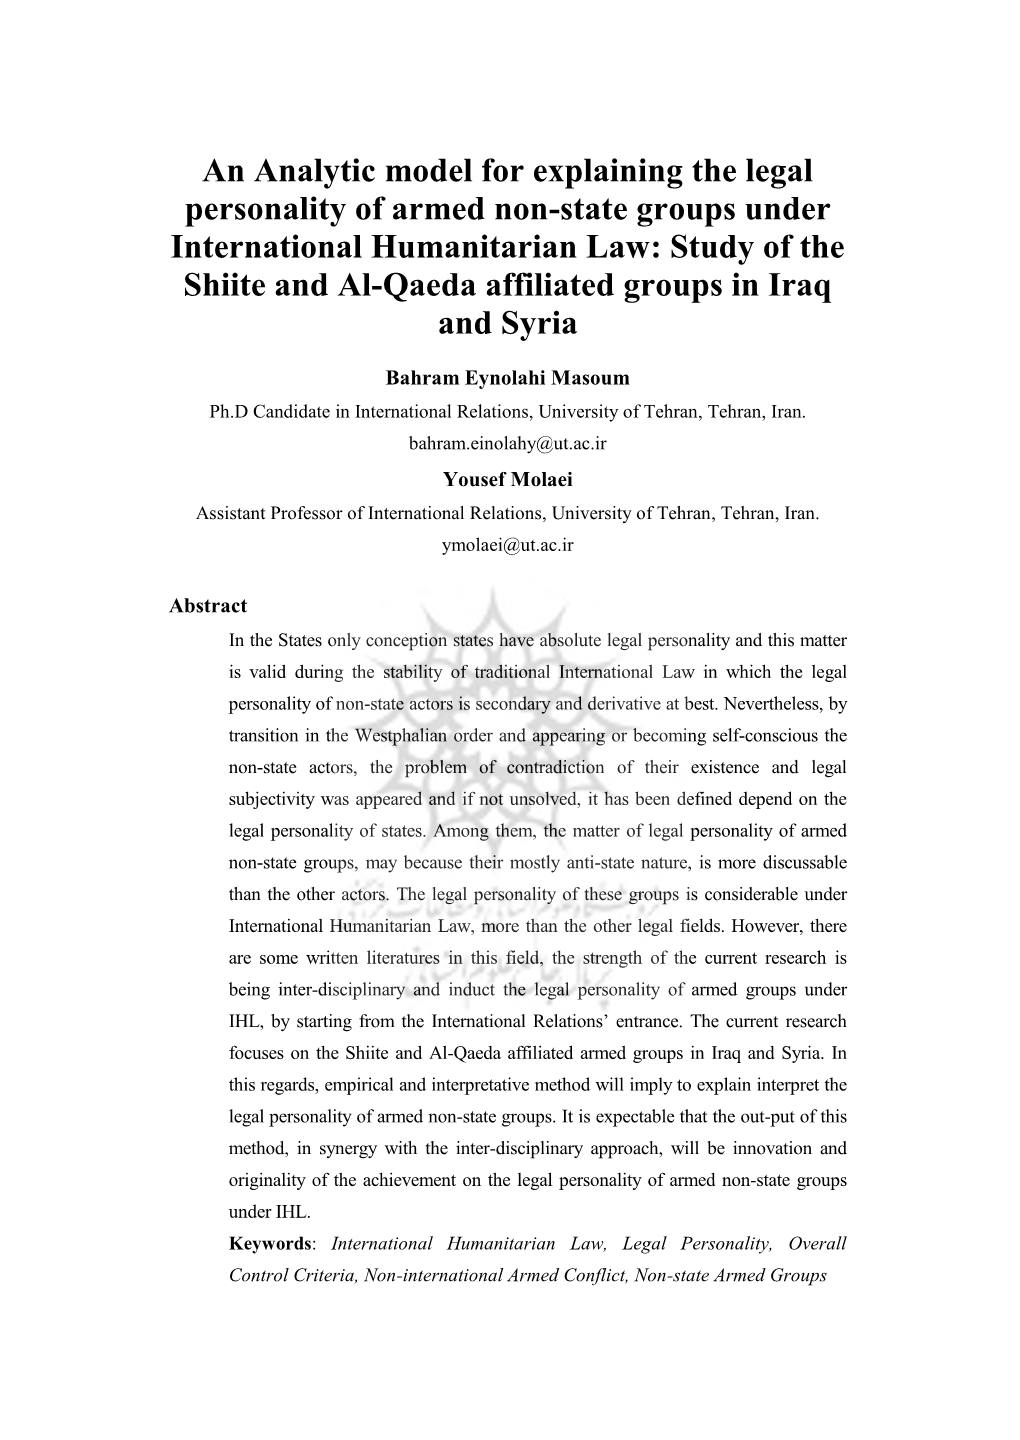 An Analytic Model for Explaining the Legal Personality of Armed Non-State